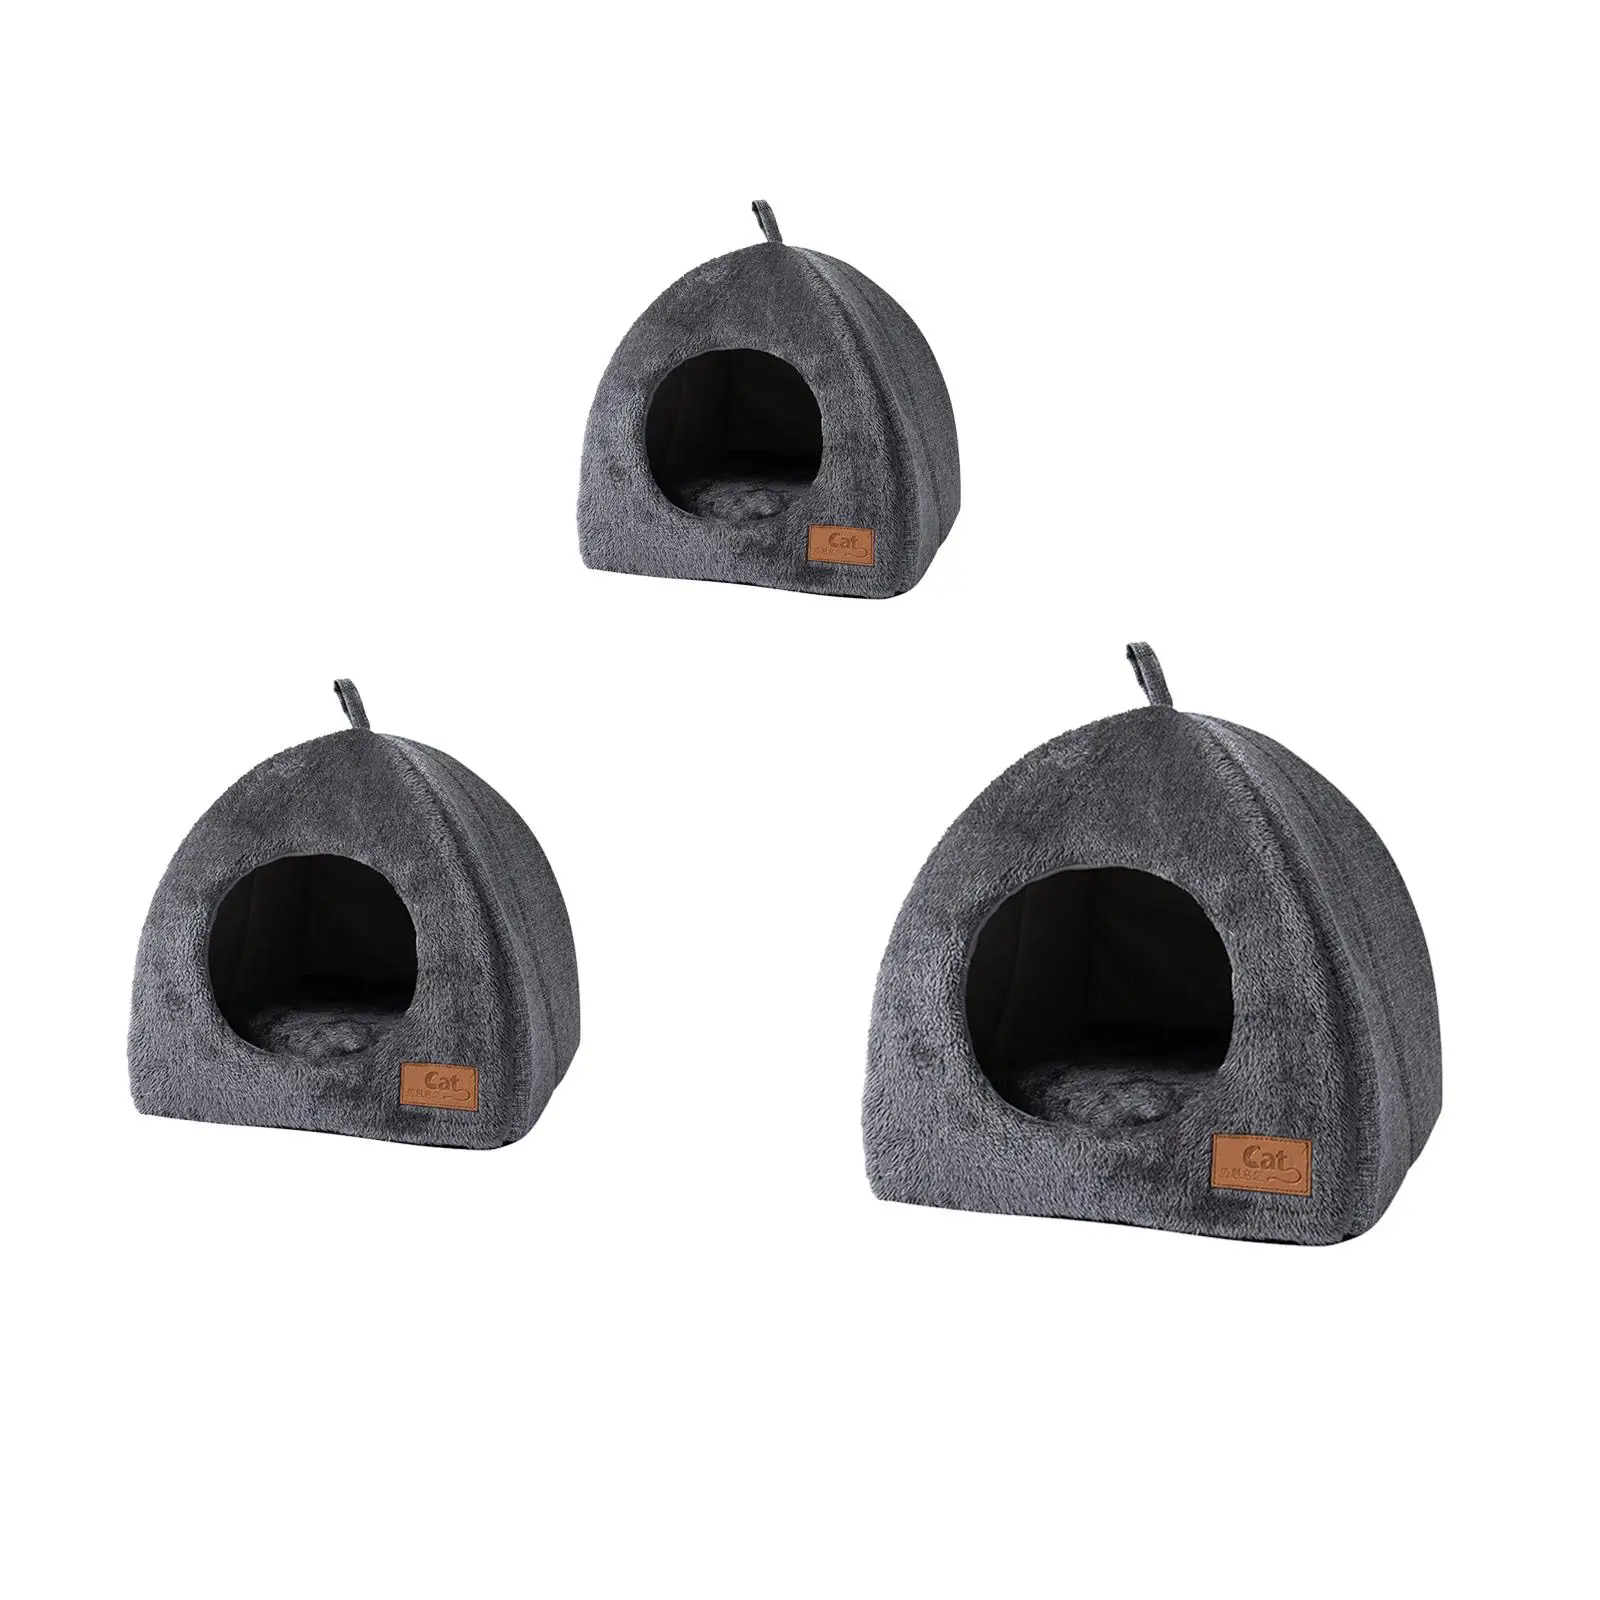 Portable Pad Nest Warm Basket Soft Cushion Sleeping Bed Thick Puppy Puppy Mat Kennel Pad for Indoor Cats Cats Winter Pet Dog